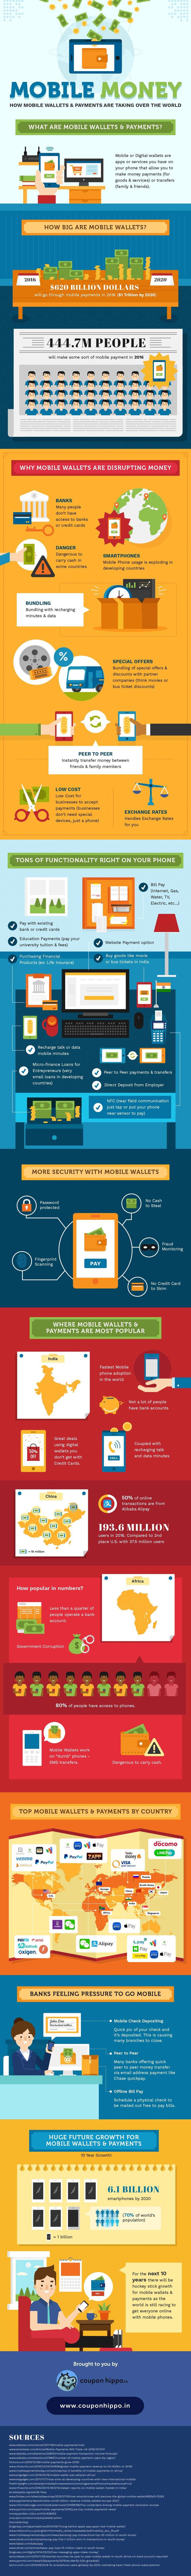 mobile_wallets_infographic